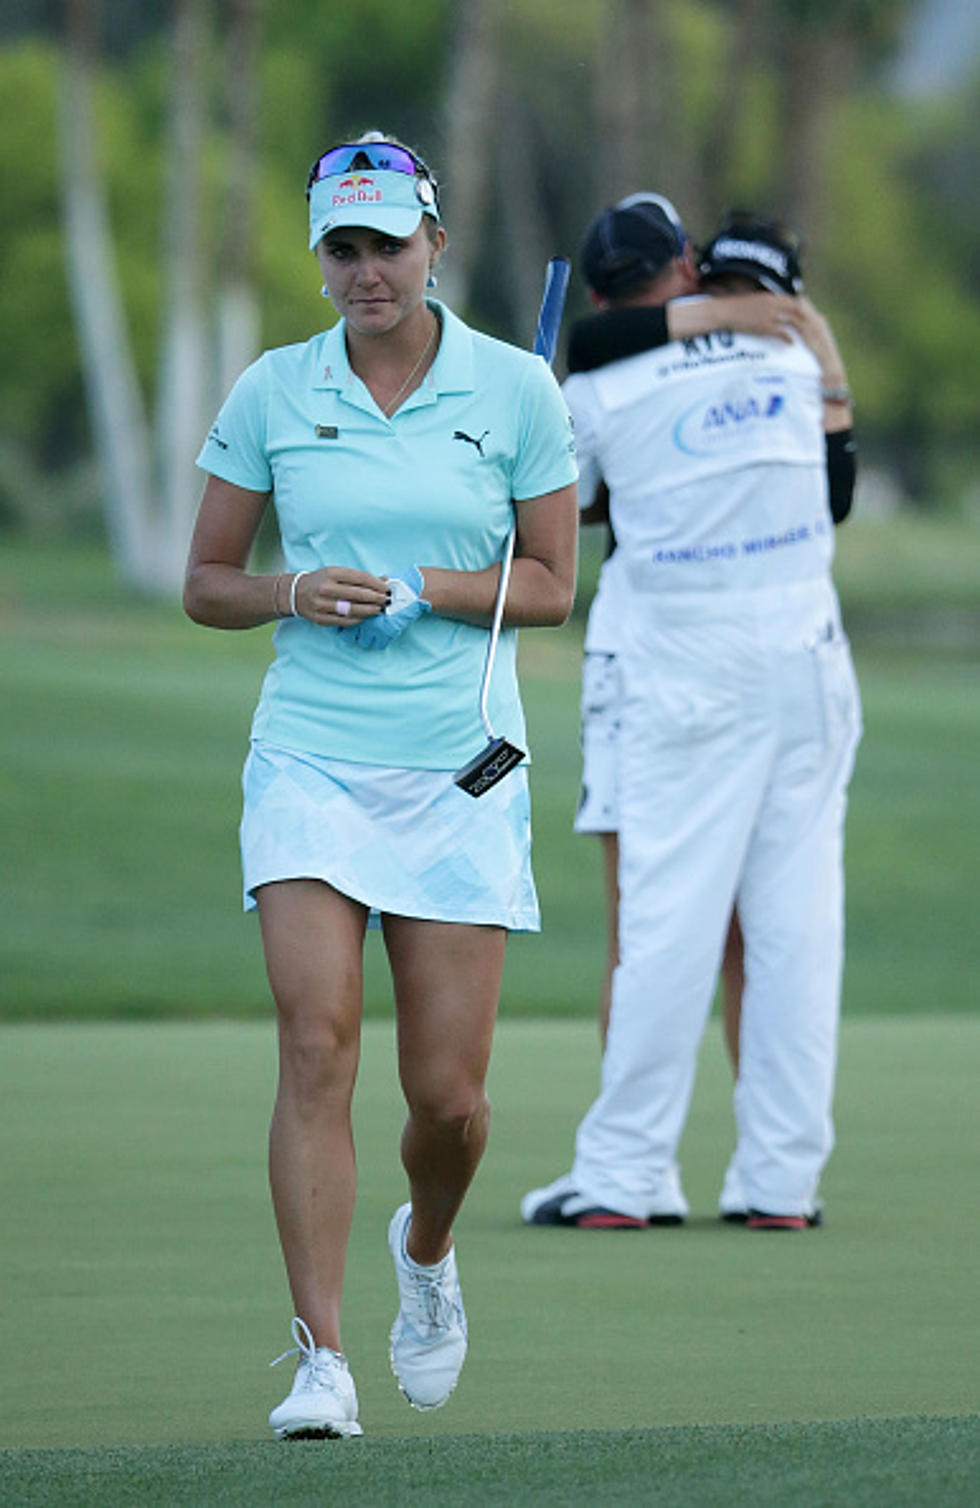 Golf should be embarrassed after the Lexi Thompson ruling